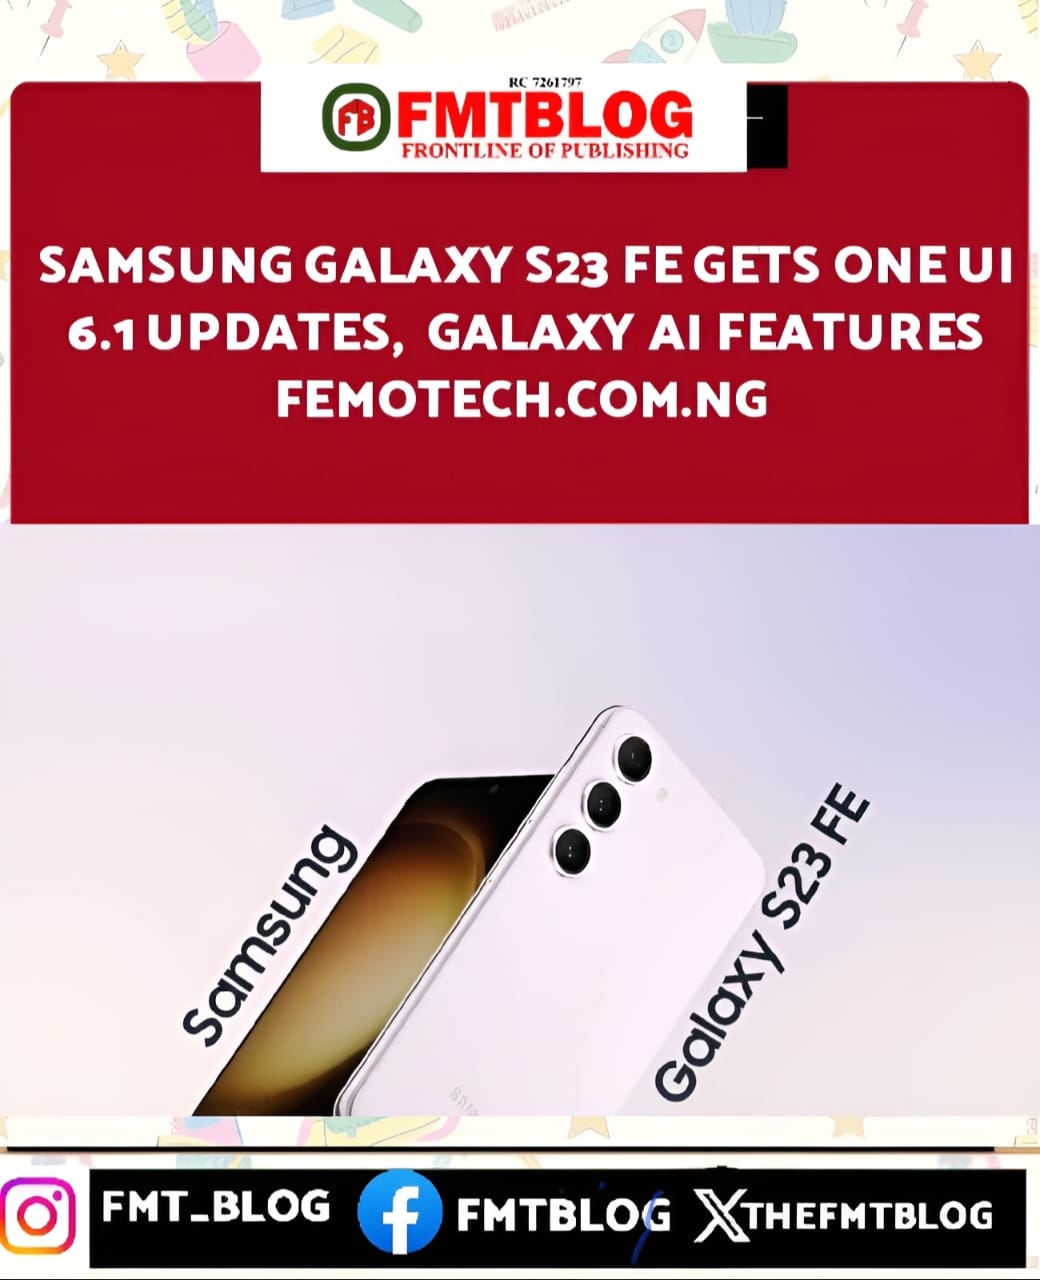 Samsung Galaxy S23 FE Gets ONE UI 6.1 Updates, Galaxy AI Features